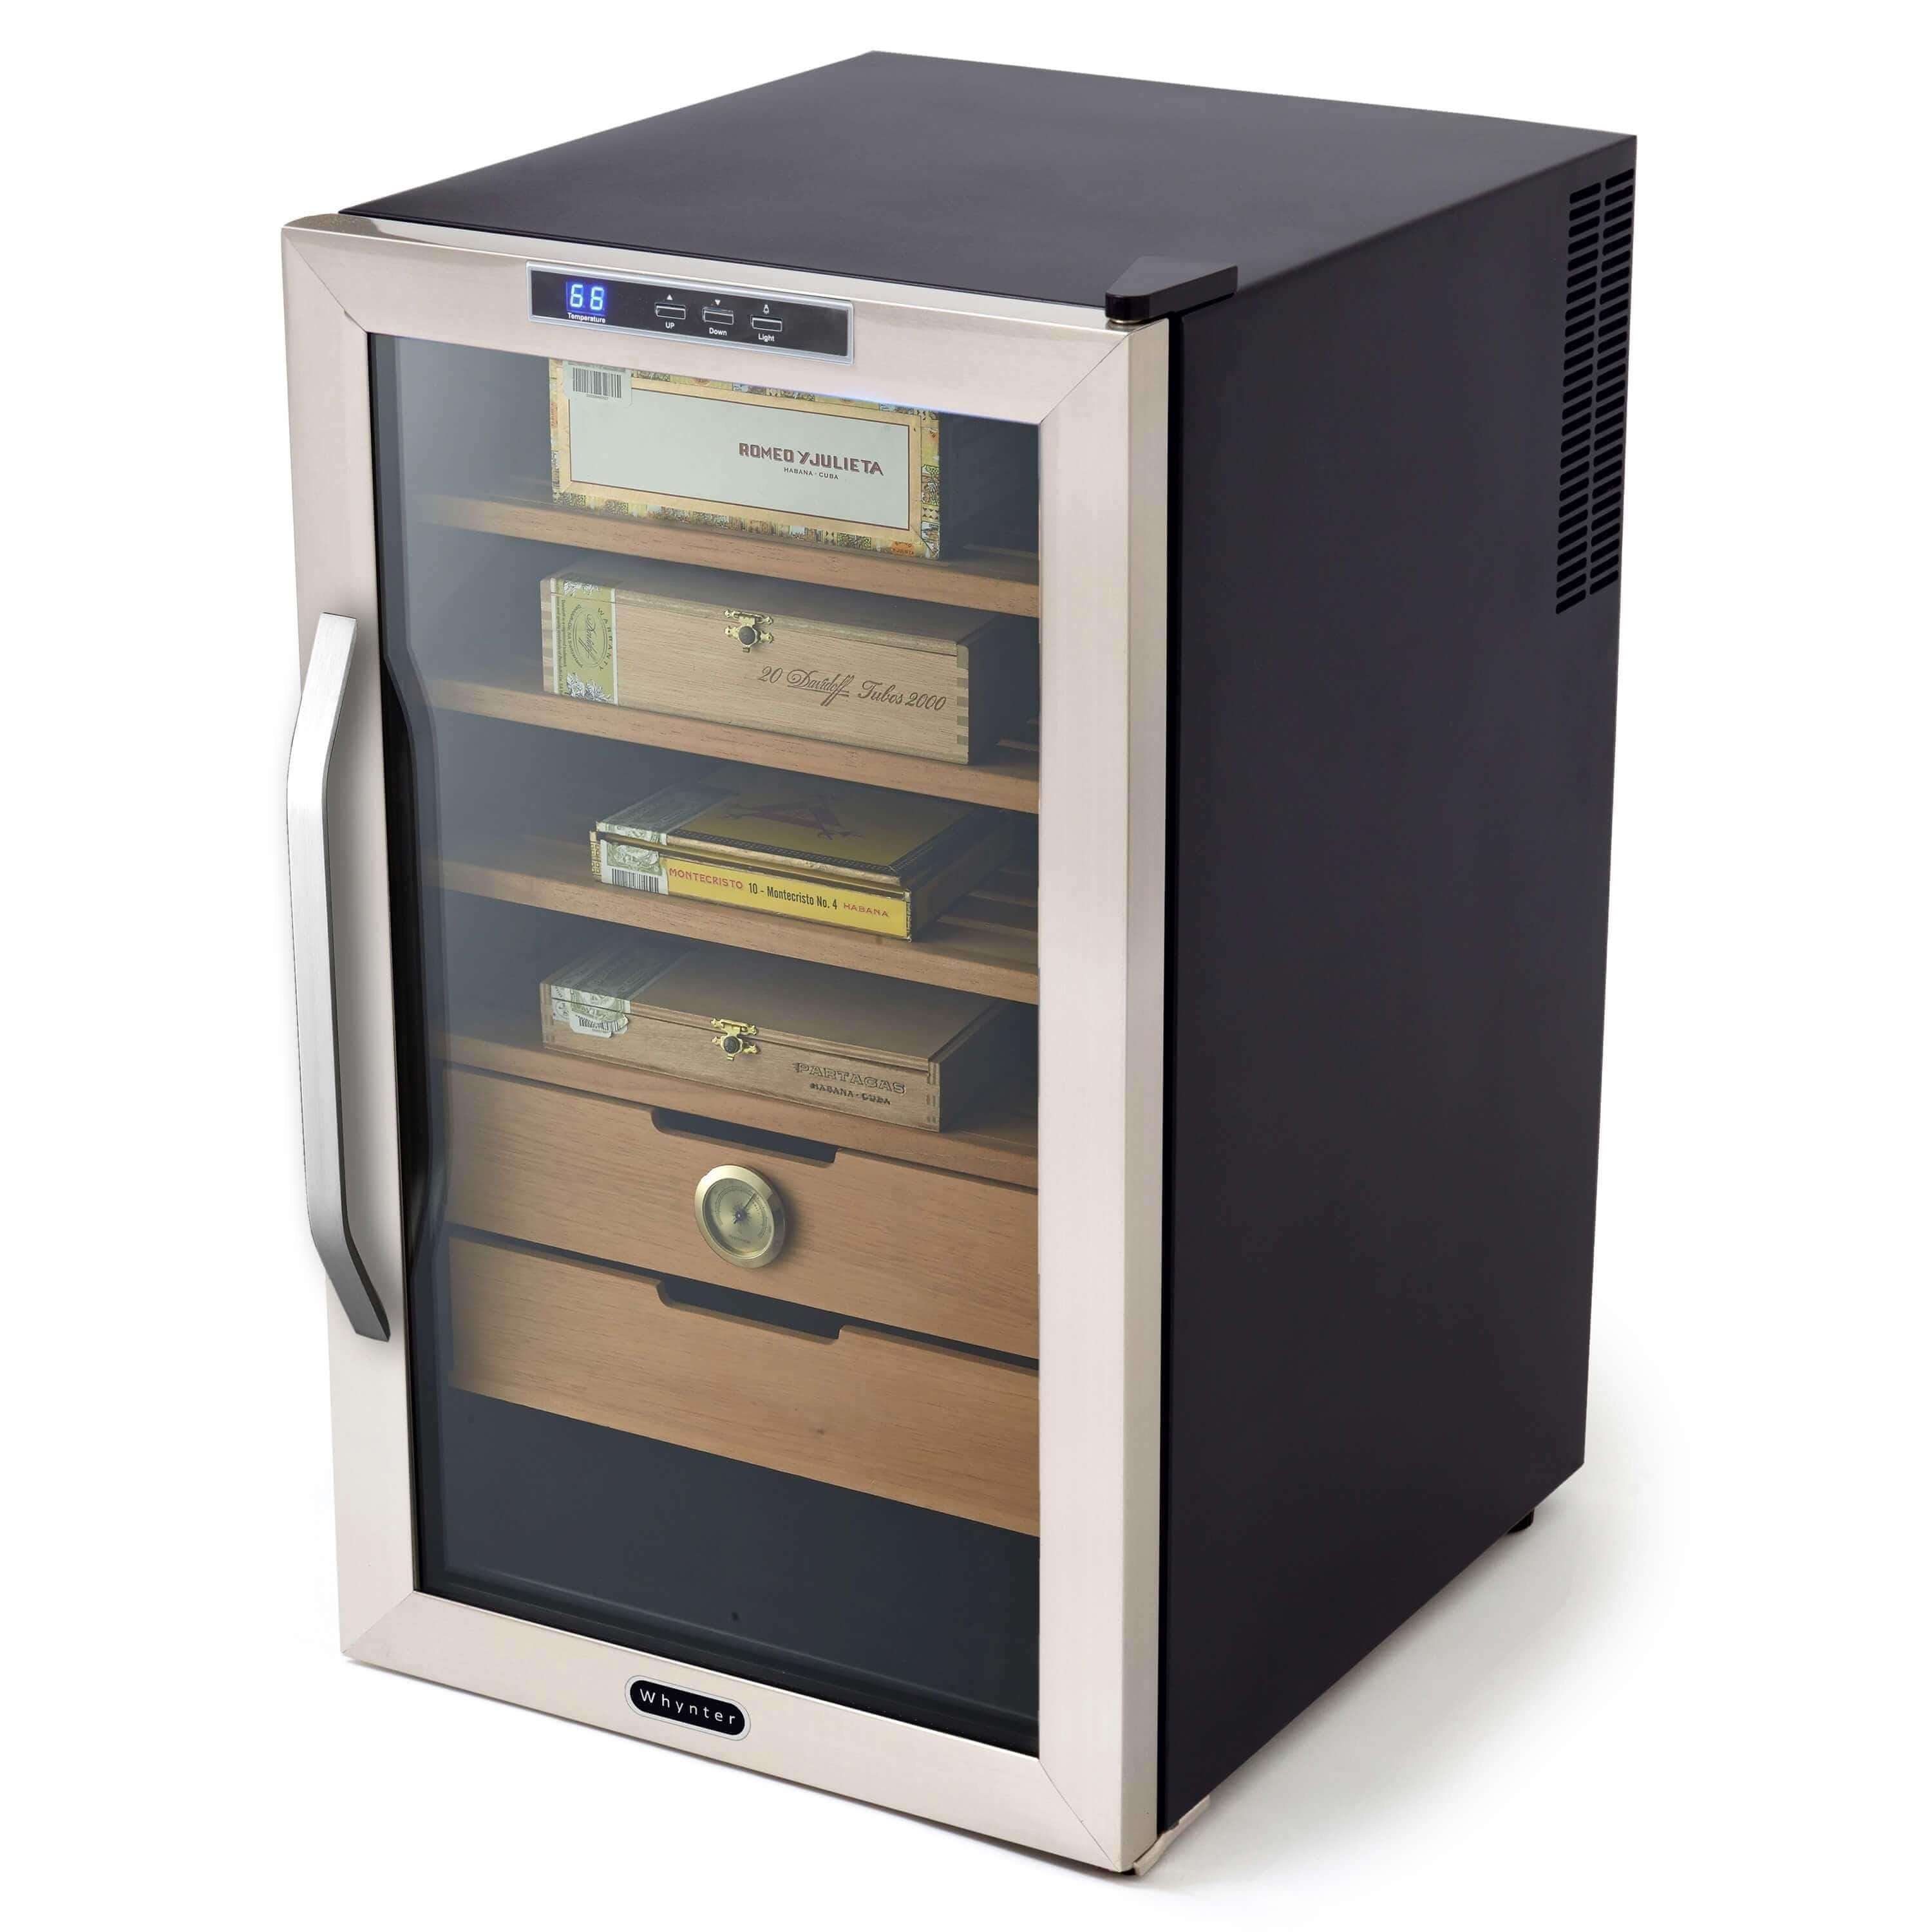 Whynter Stainless Steel 2.5 cu. ft. Cigar Cooler Humidor CHC-251S Wine Coolers Empire